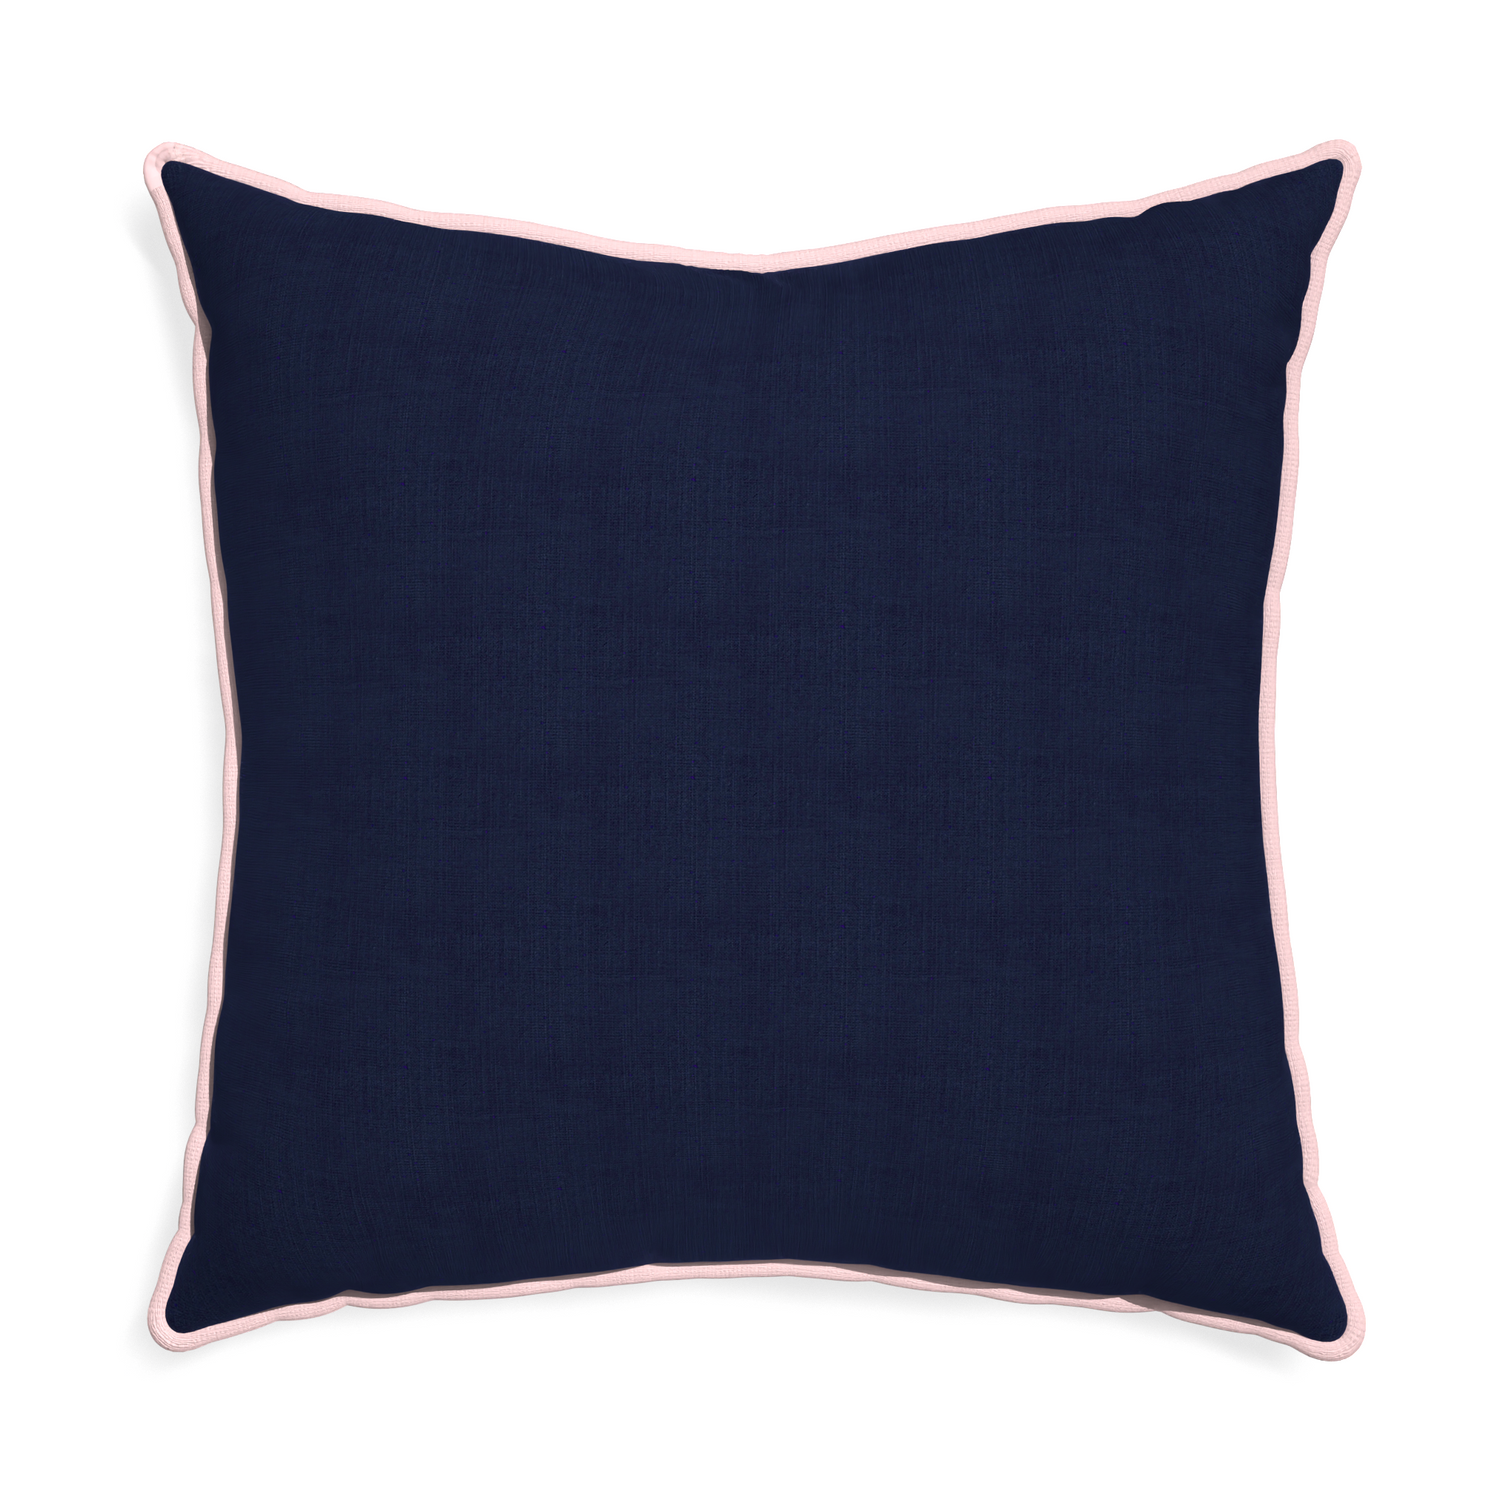 Euro-sham midnight custom pillow with petal piping on white background